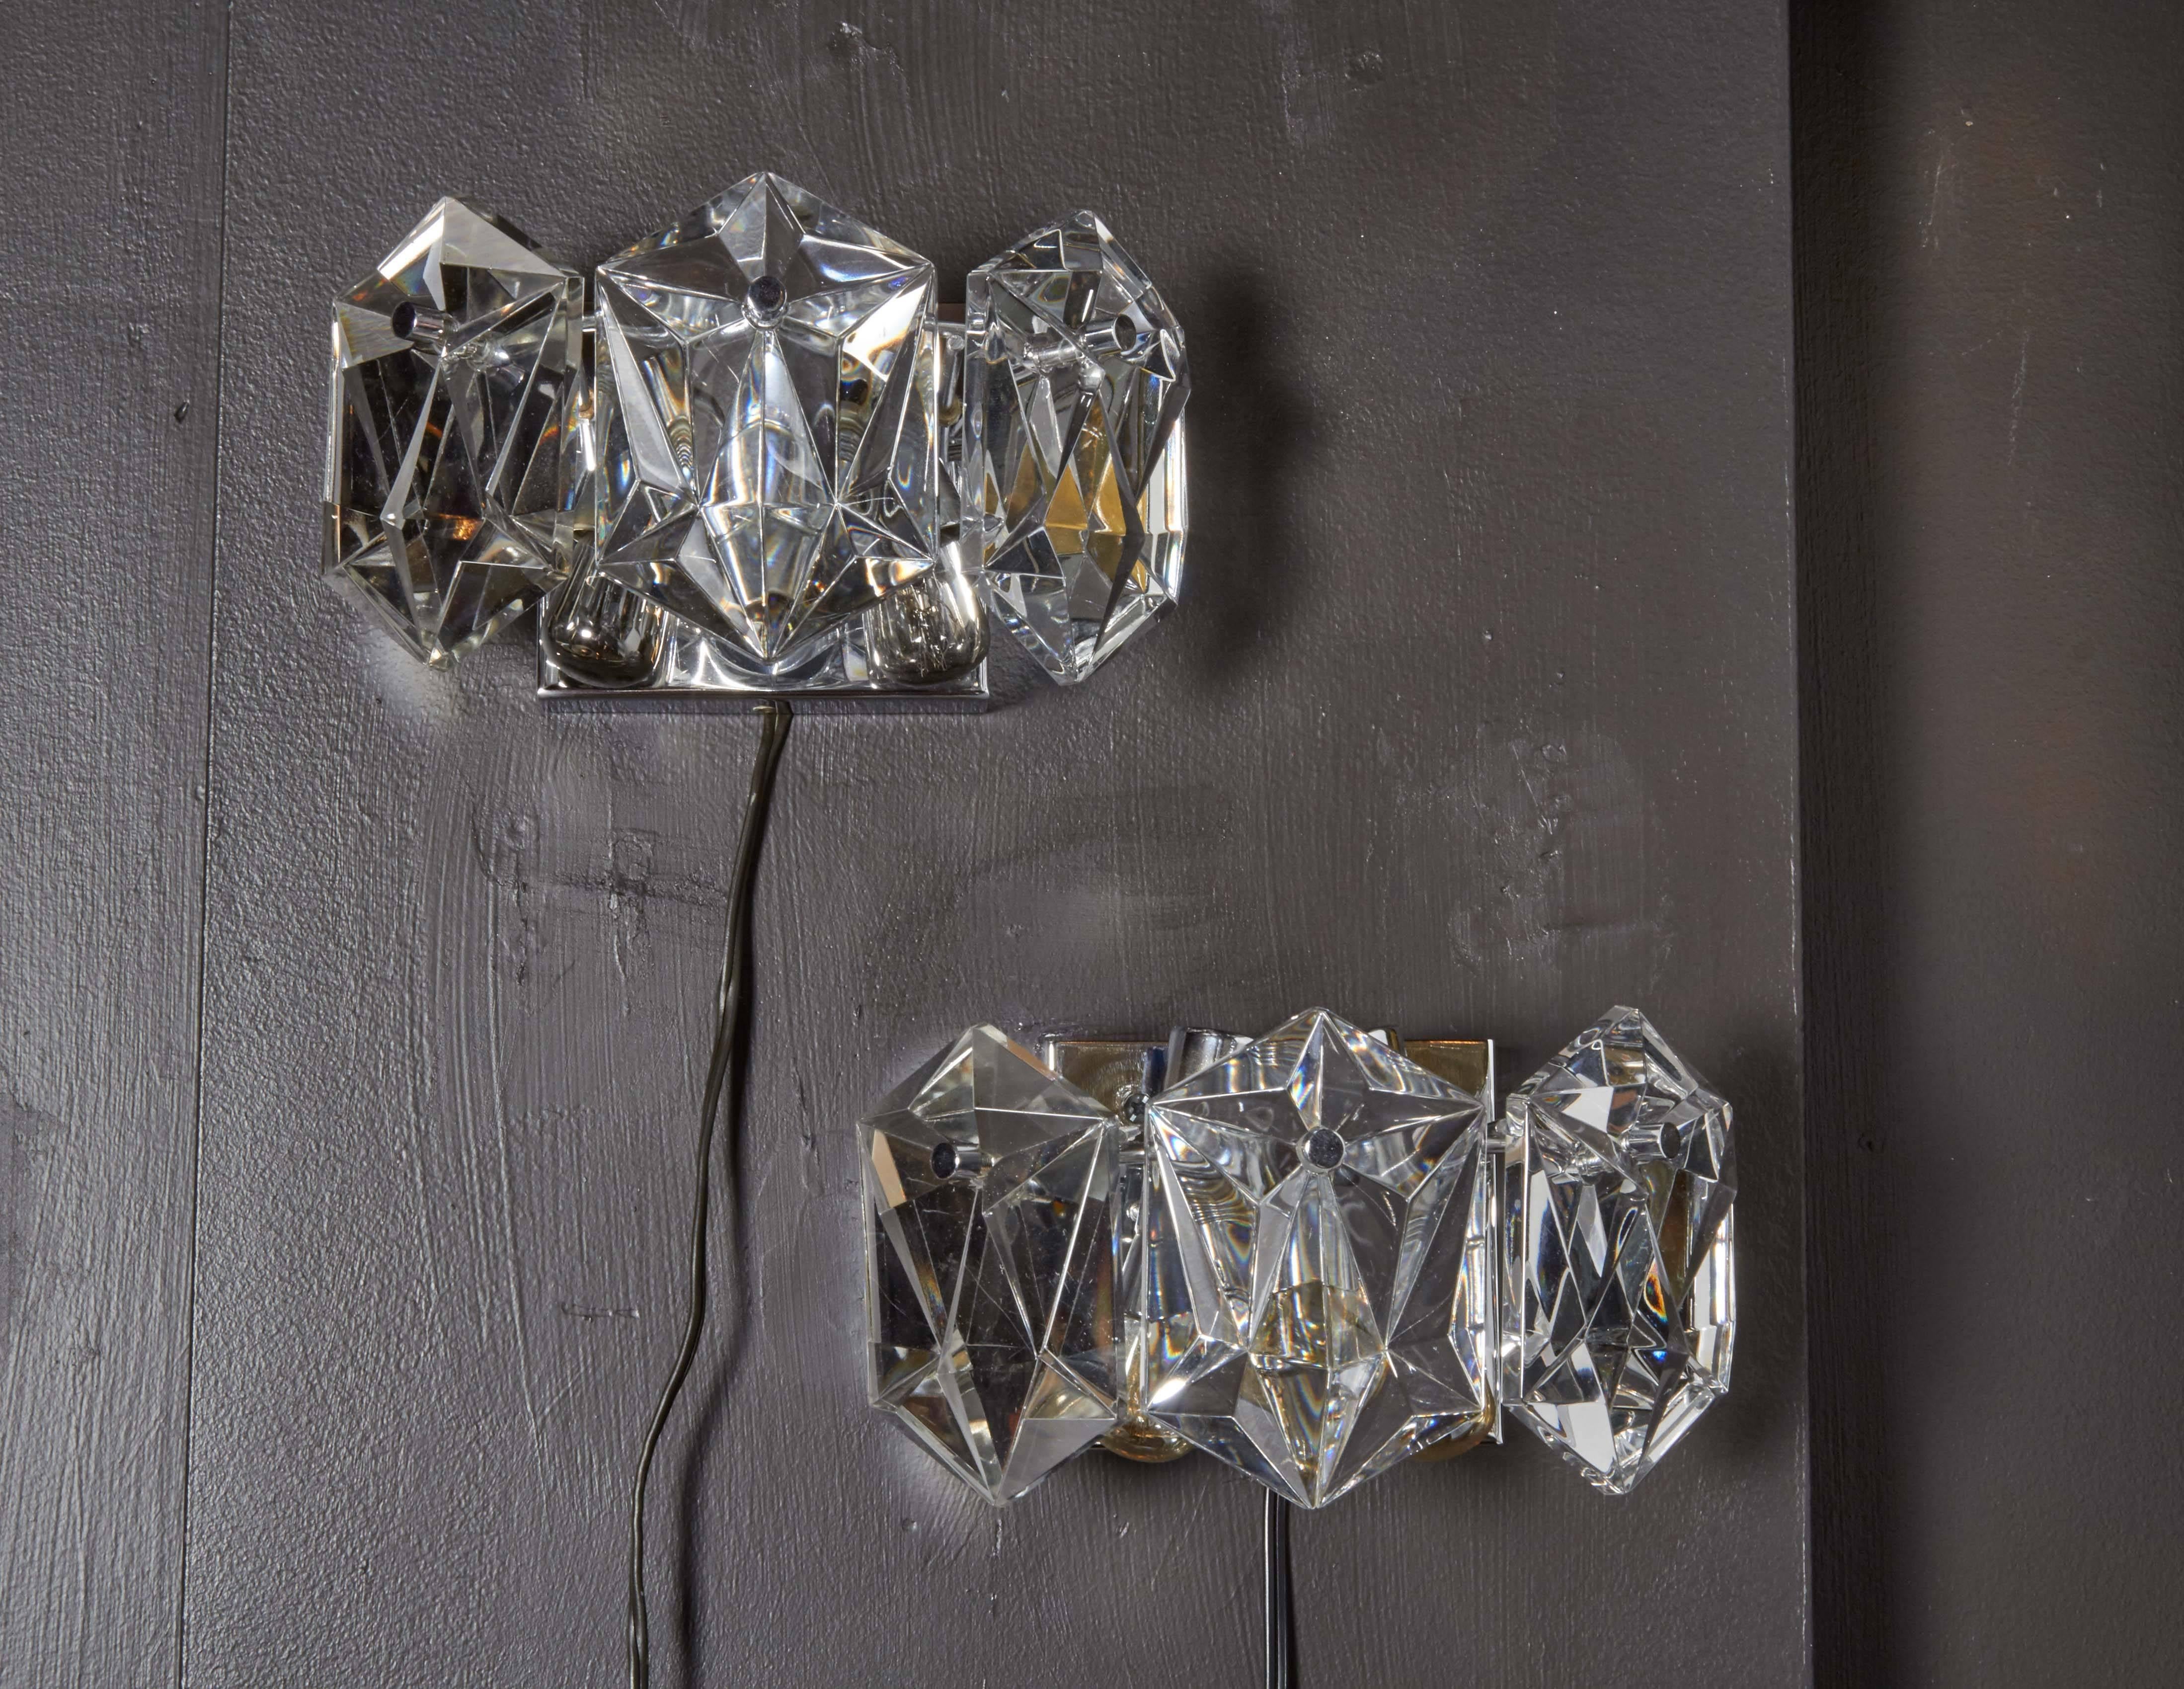 Pair of exquisite wall-mount lights, each featuring three faceted crystal prisms. Simple floating frames are finished in polished chrome with matching fittings, and have been newly rewired to accommodate two lights each. Perfect scale for powder